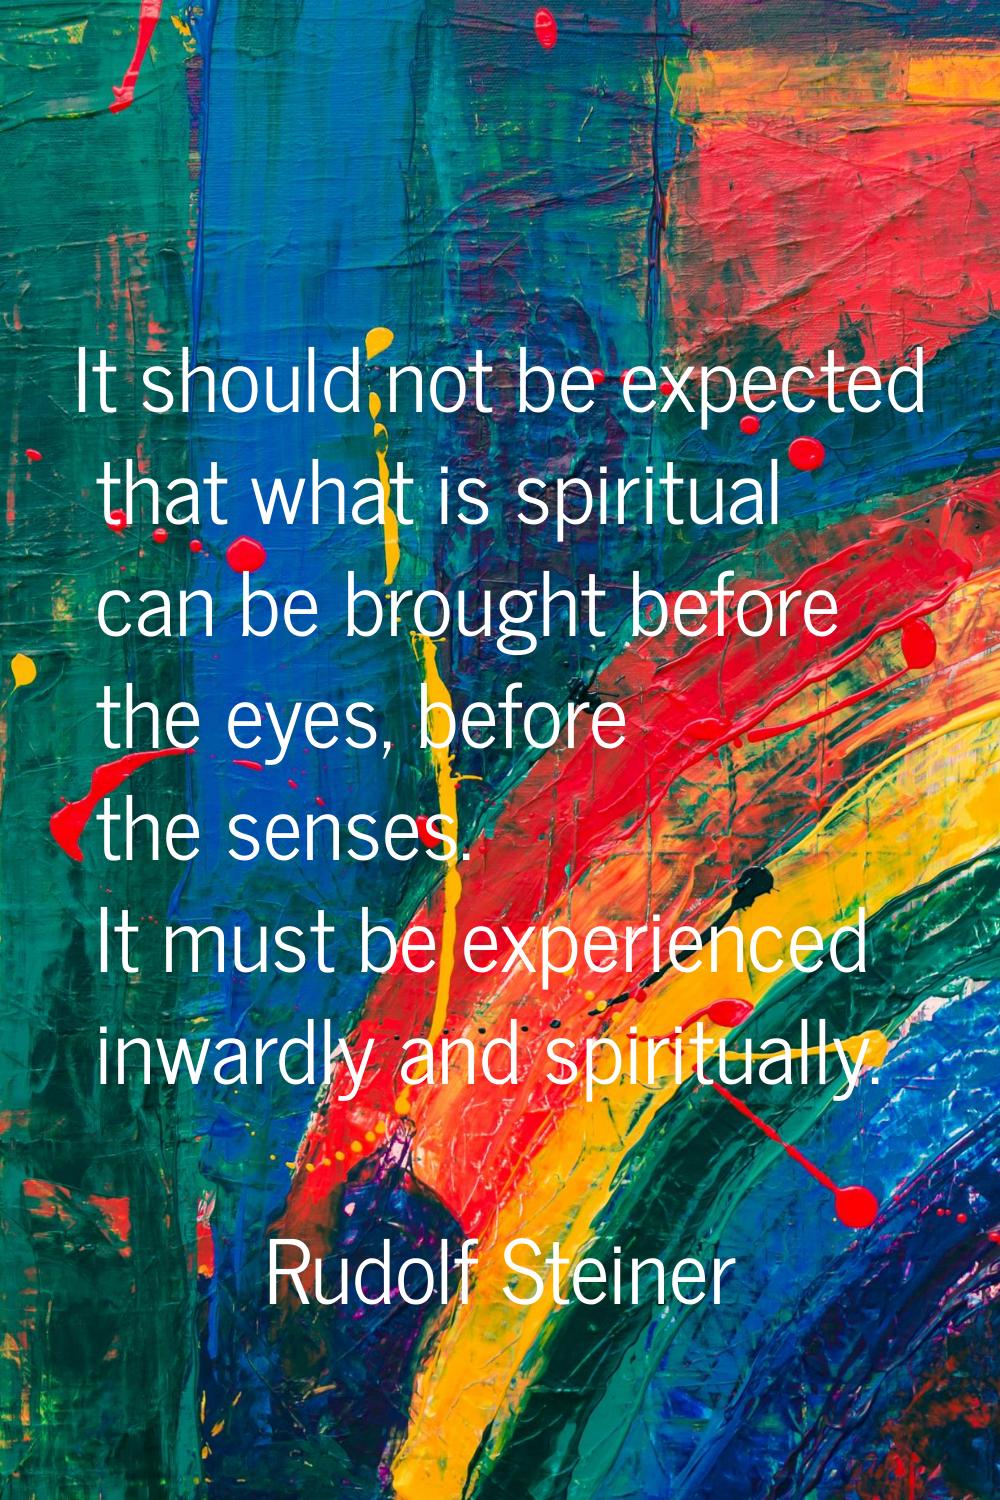 It should not be expected that what is spiritual can be brought before the eyes, before the senses.